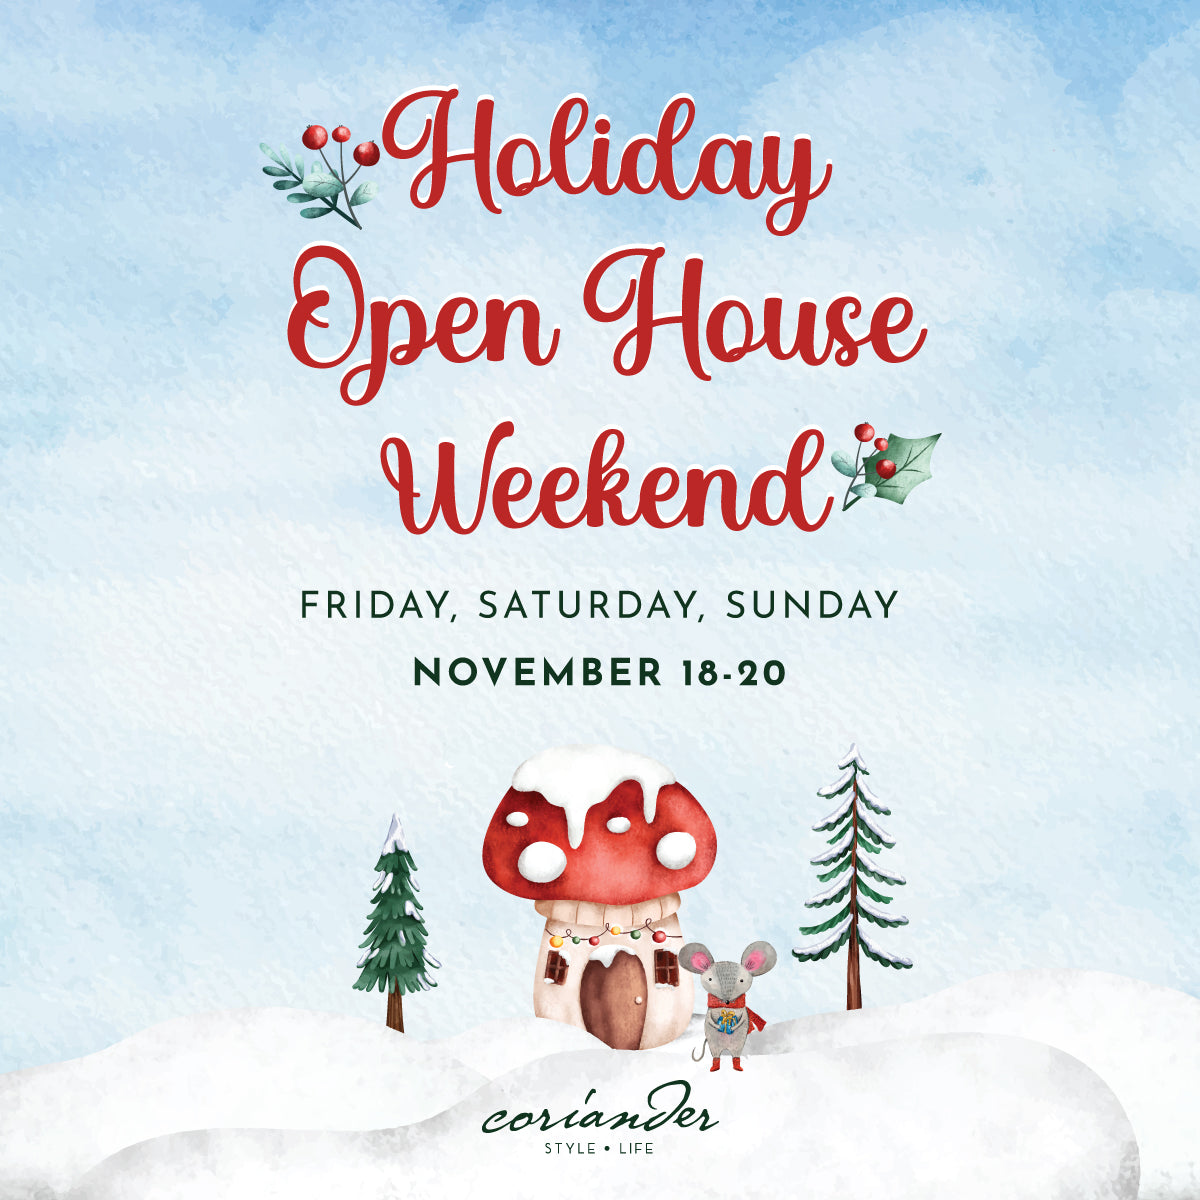 Friends & Family Holiday Open House Weekend